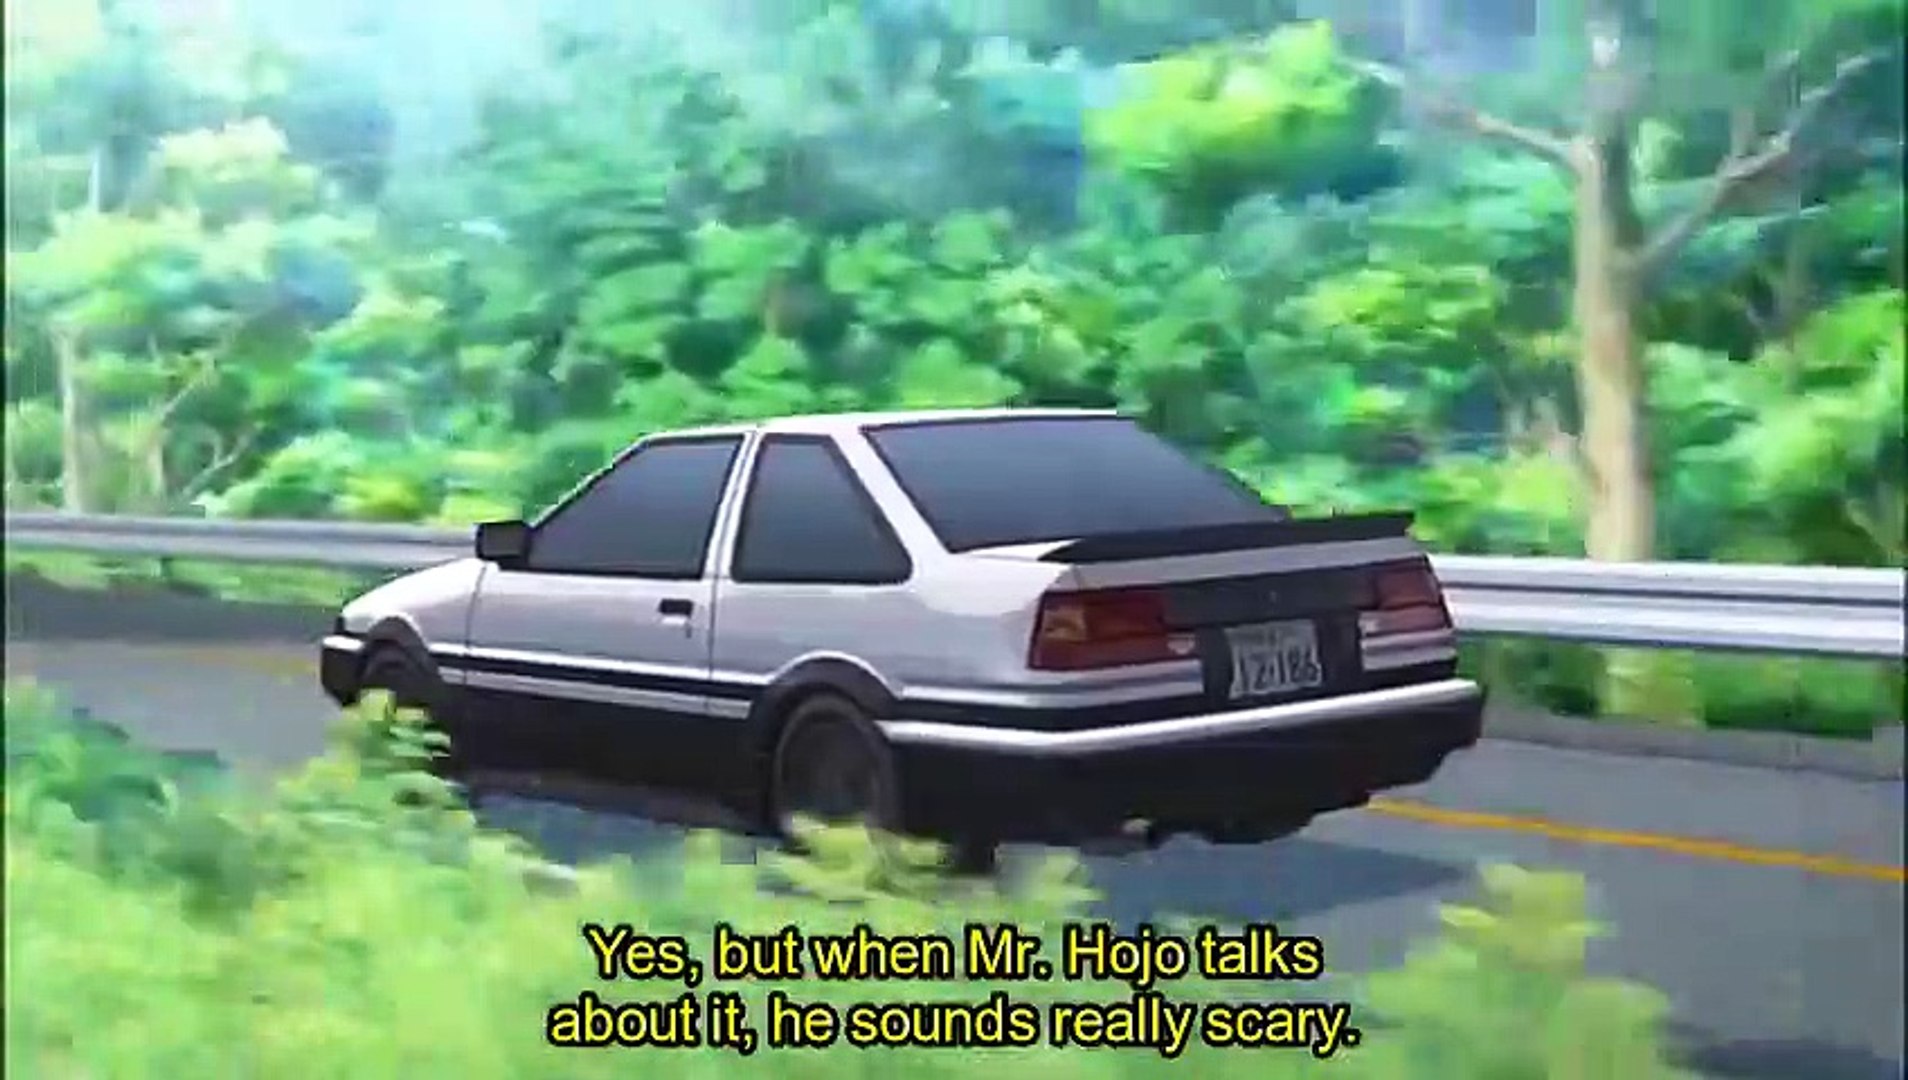 Initial D 5th Stage Final Stage Episode 15 part 02 - video Dailymotion